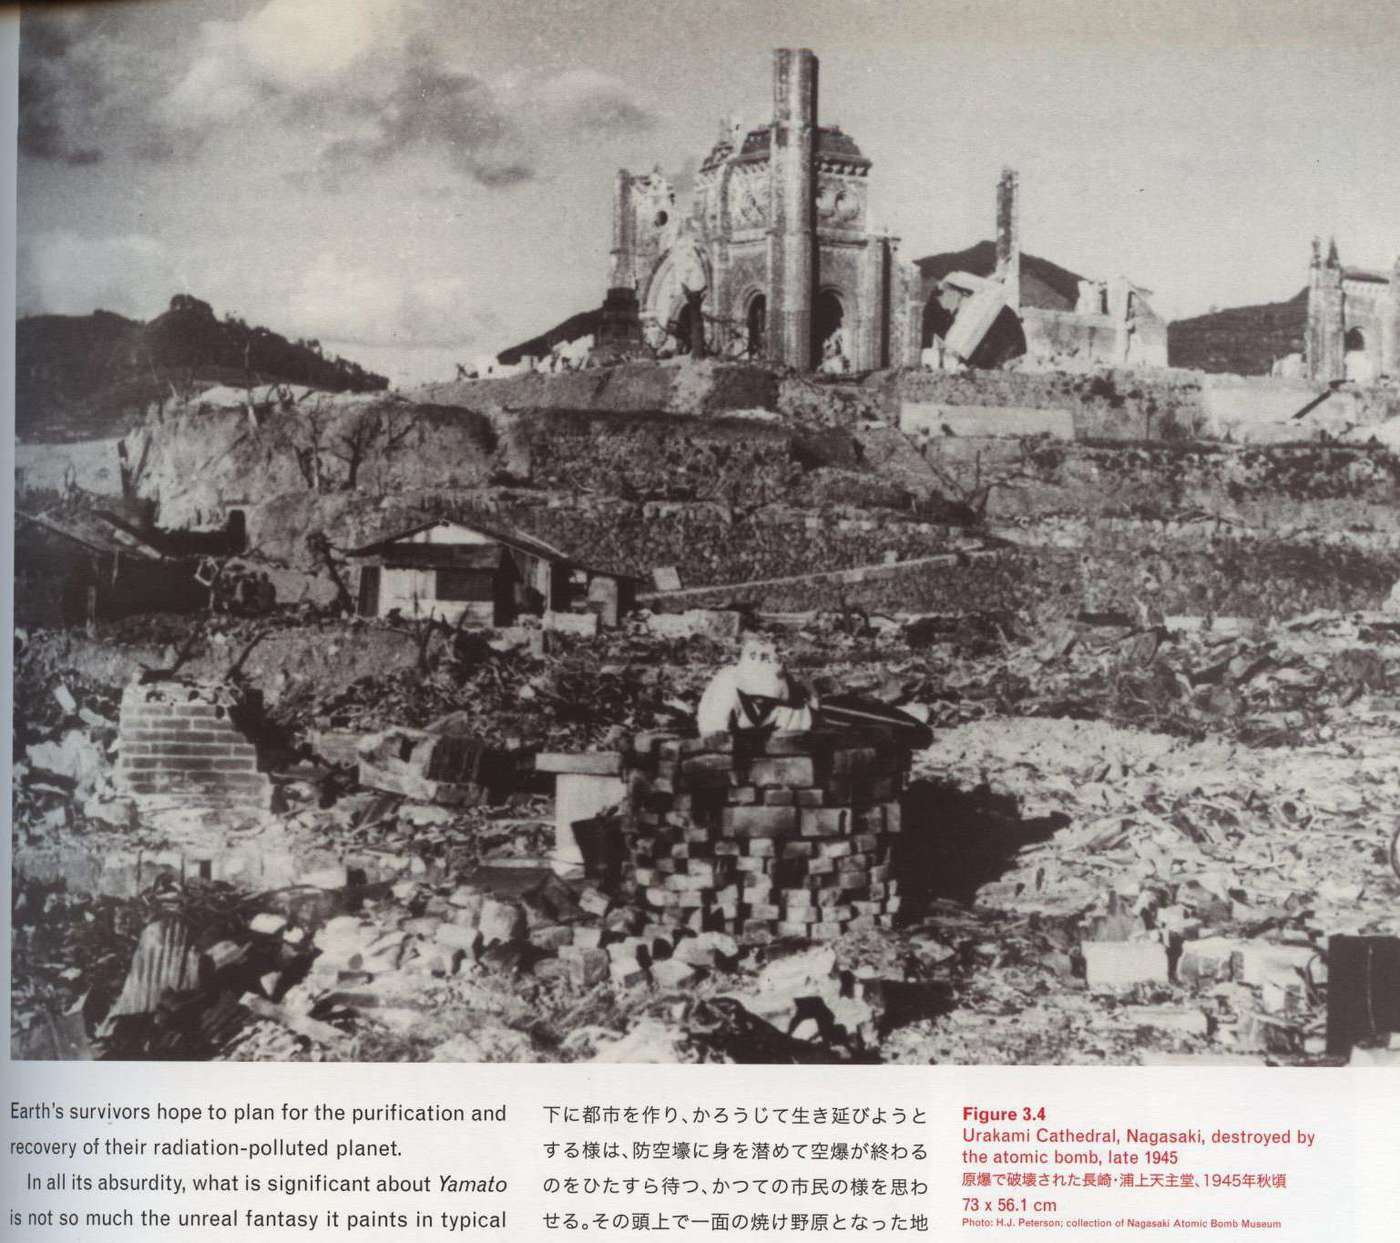 Caption right top: Urakami Cathedral, Nagasaki, destroyed by the atomic bomb, late 1945